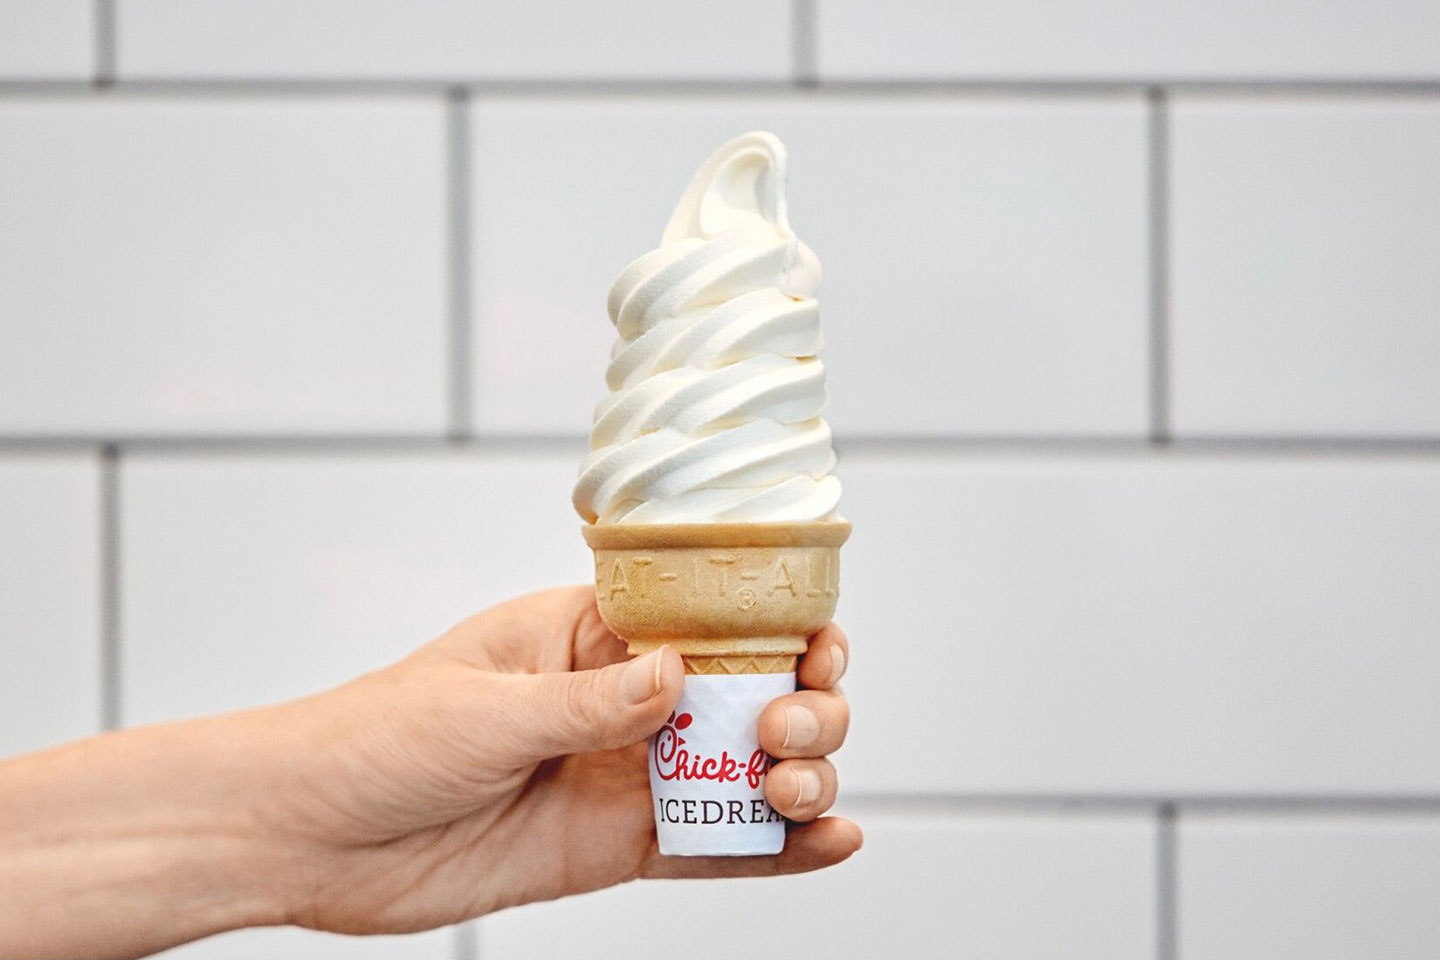 Can I Guess Your Age & Gender by Your Chick-fil-A Order? Quiz Chick-fil-A Icedream Cone